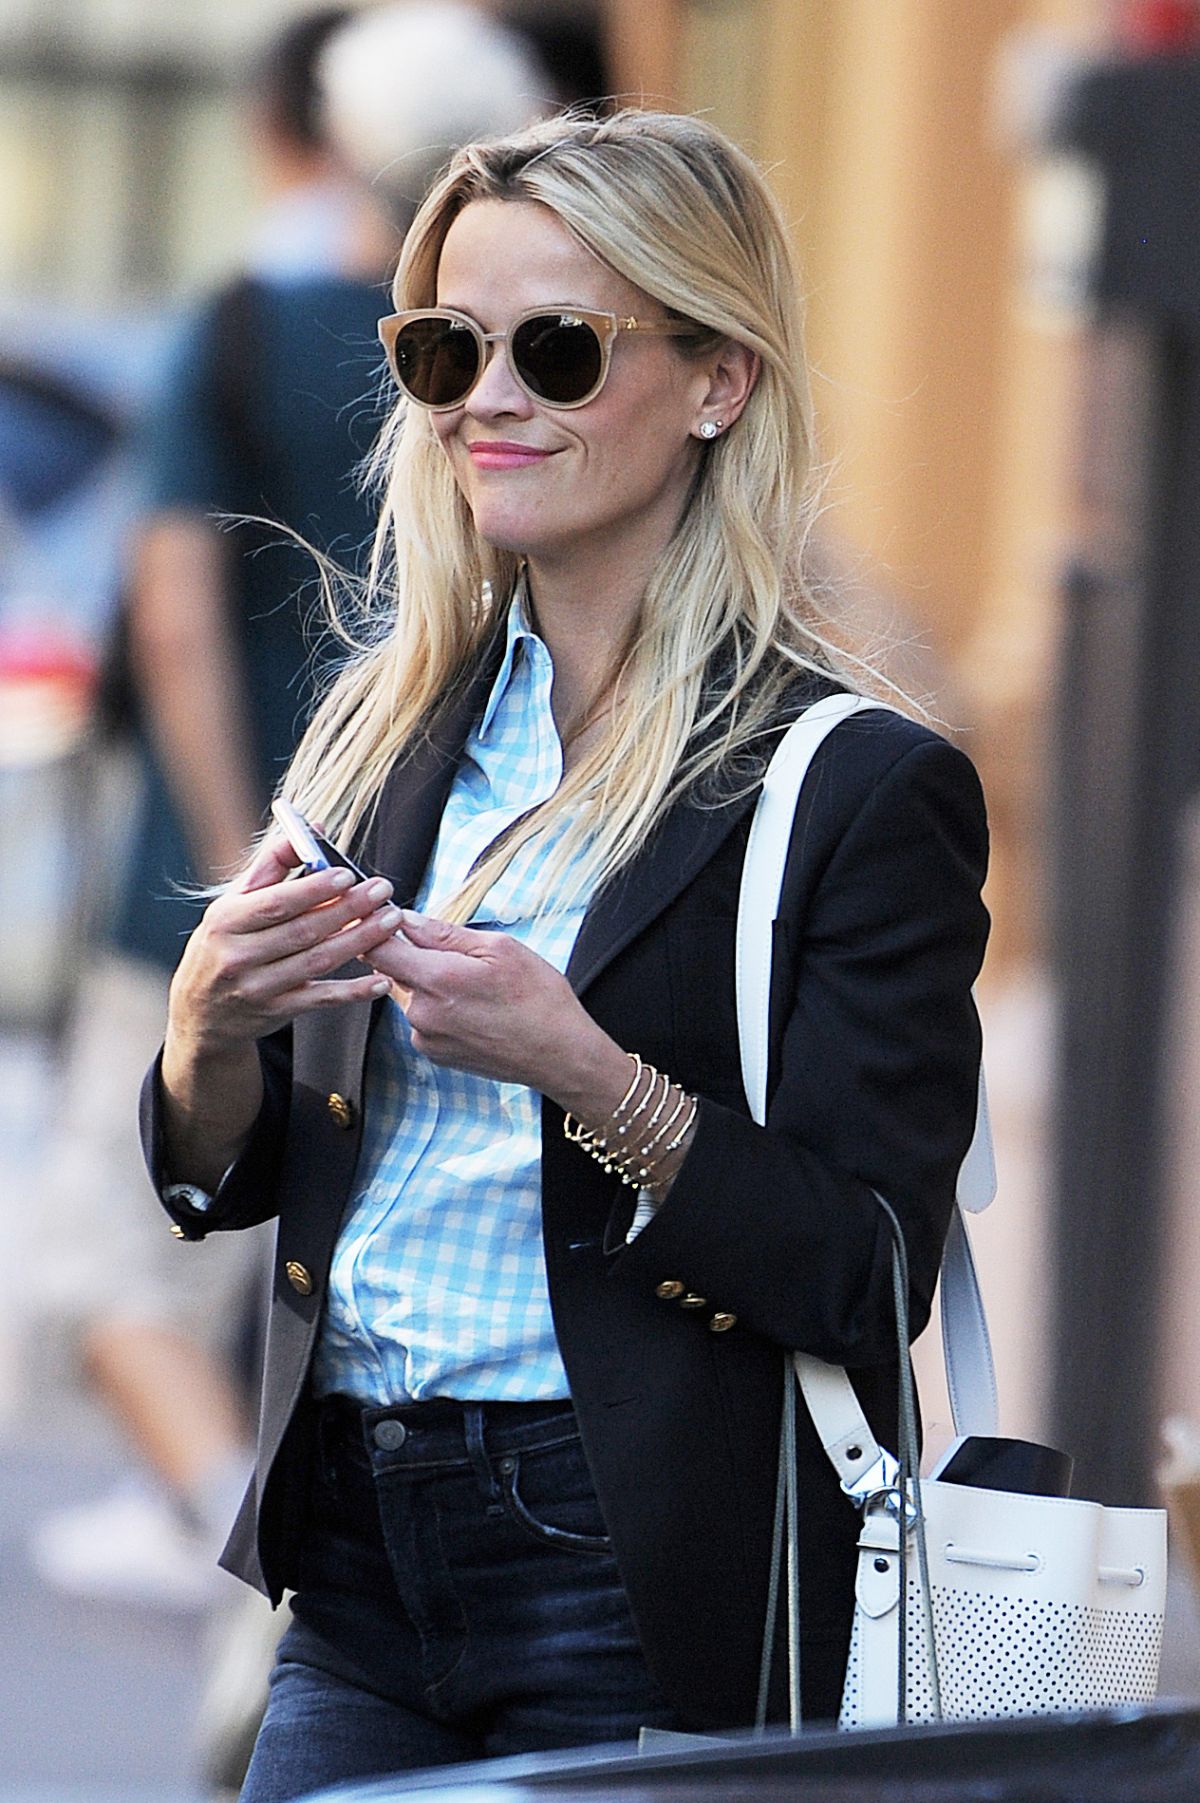 reese-witherspoon-shopping-in-new-york-city-61416-2.jpg